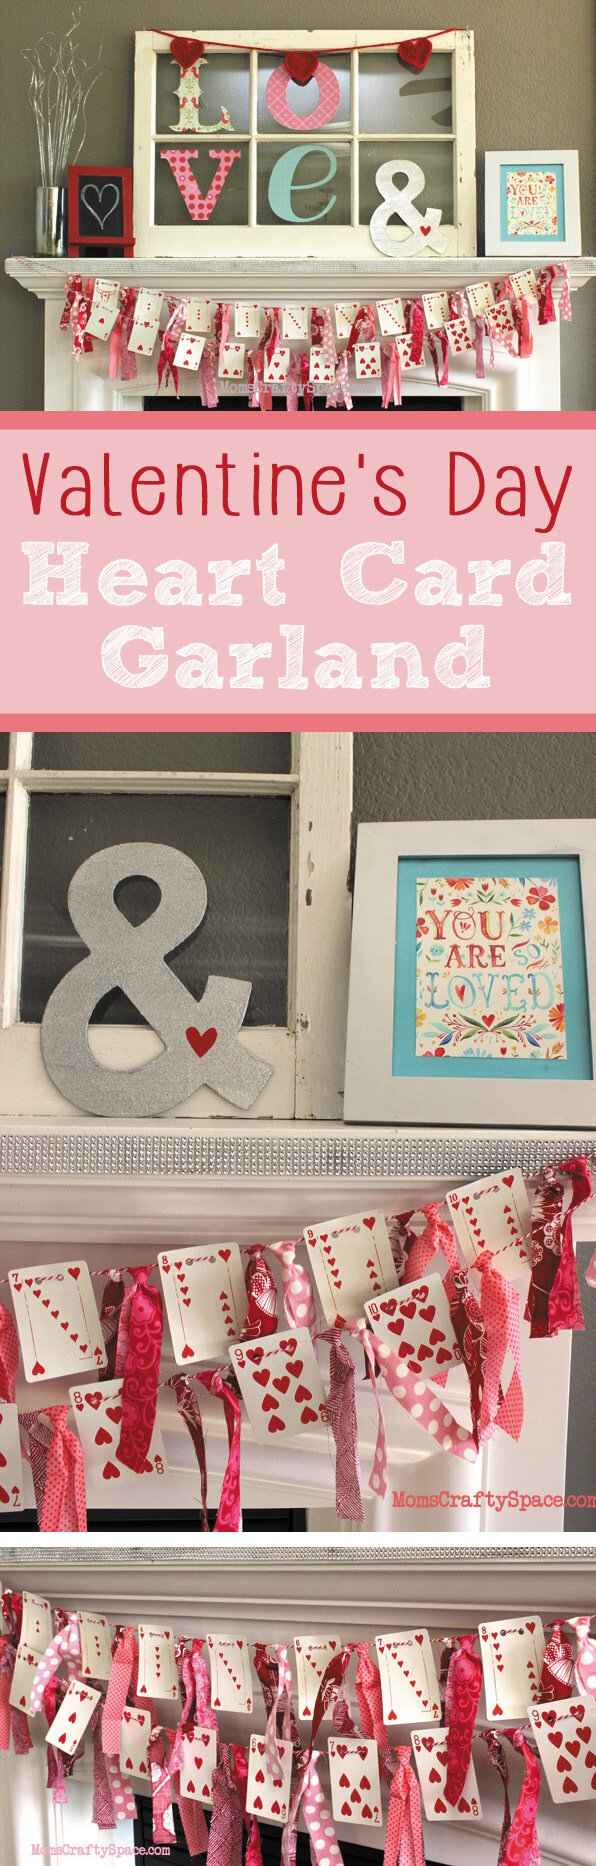 Valentine's Day Heart Playing Cards Banner Garland